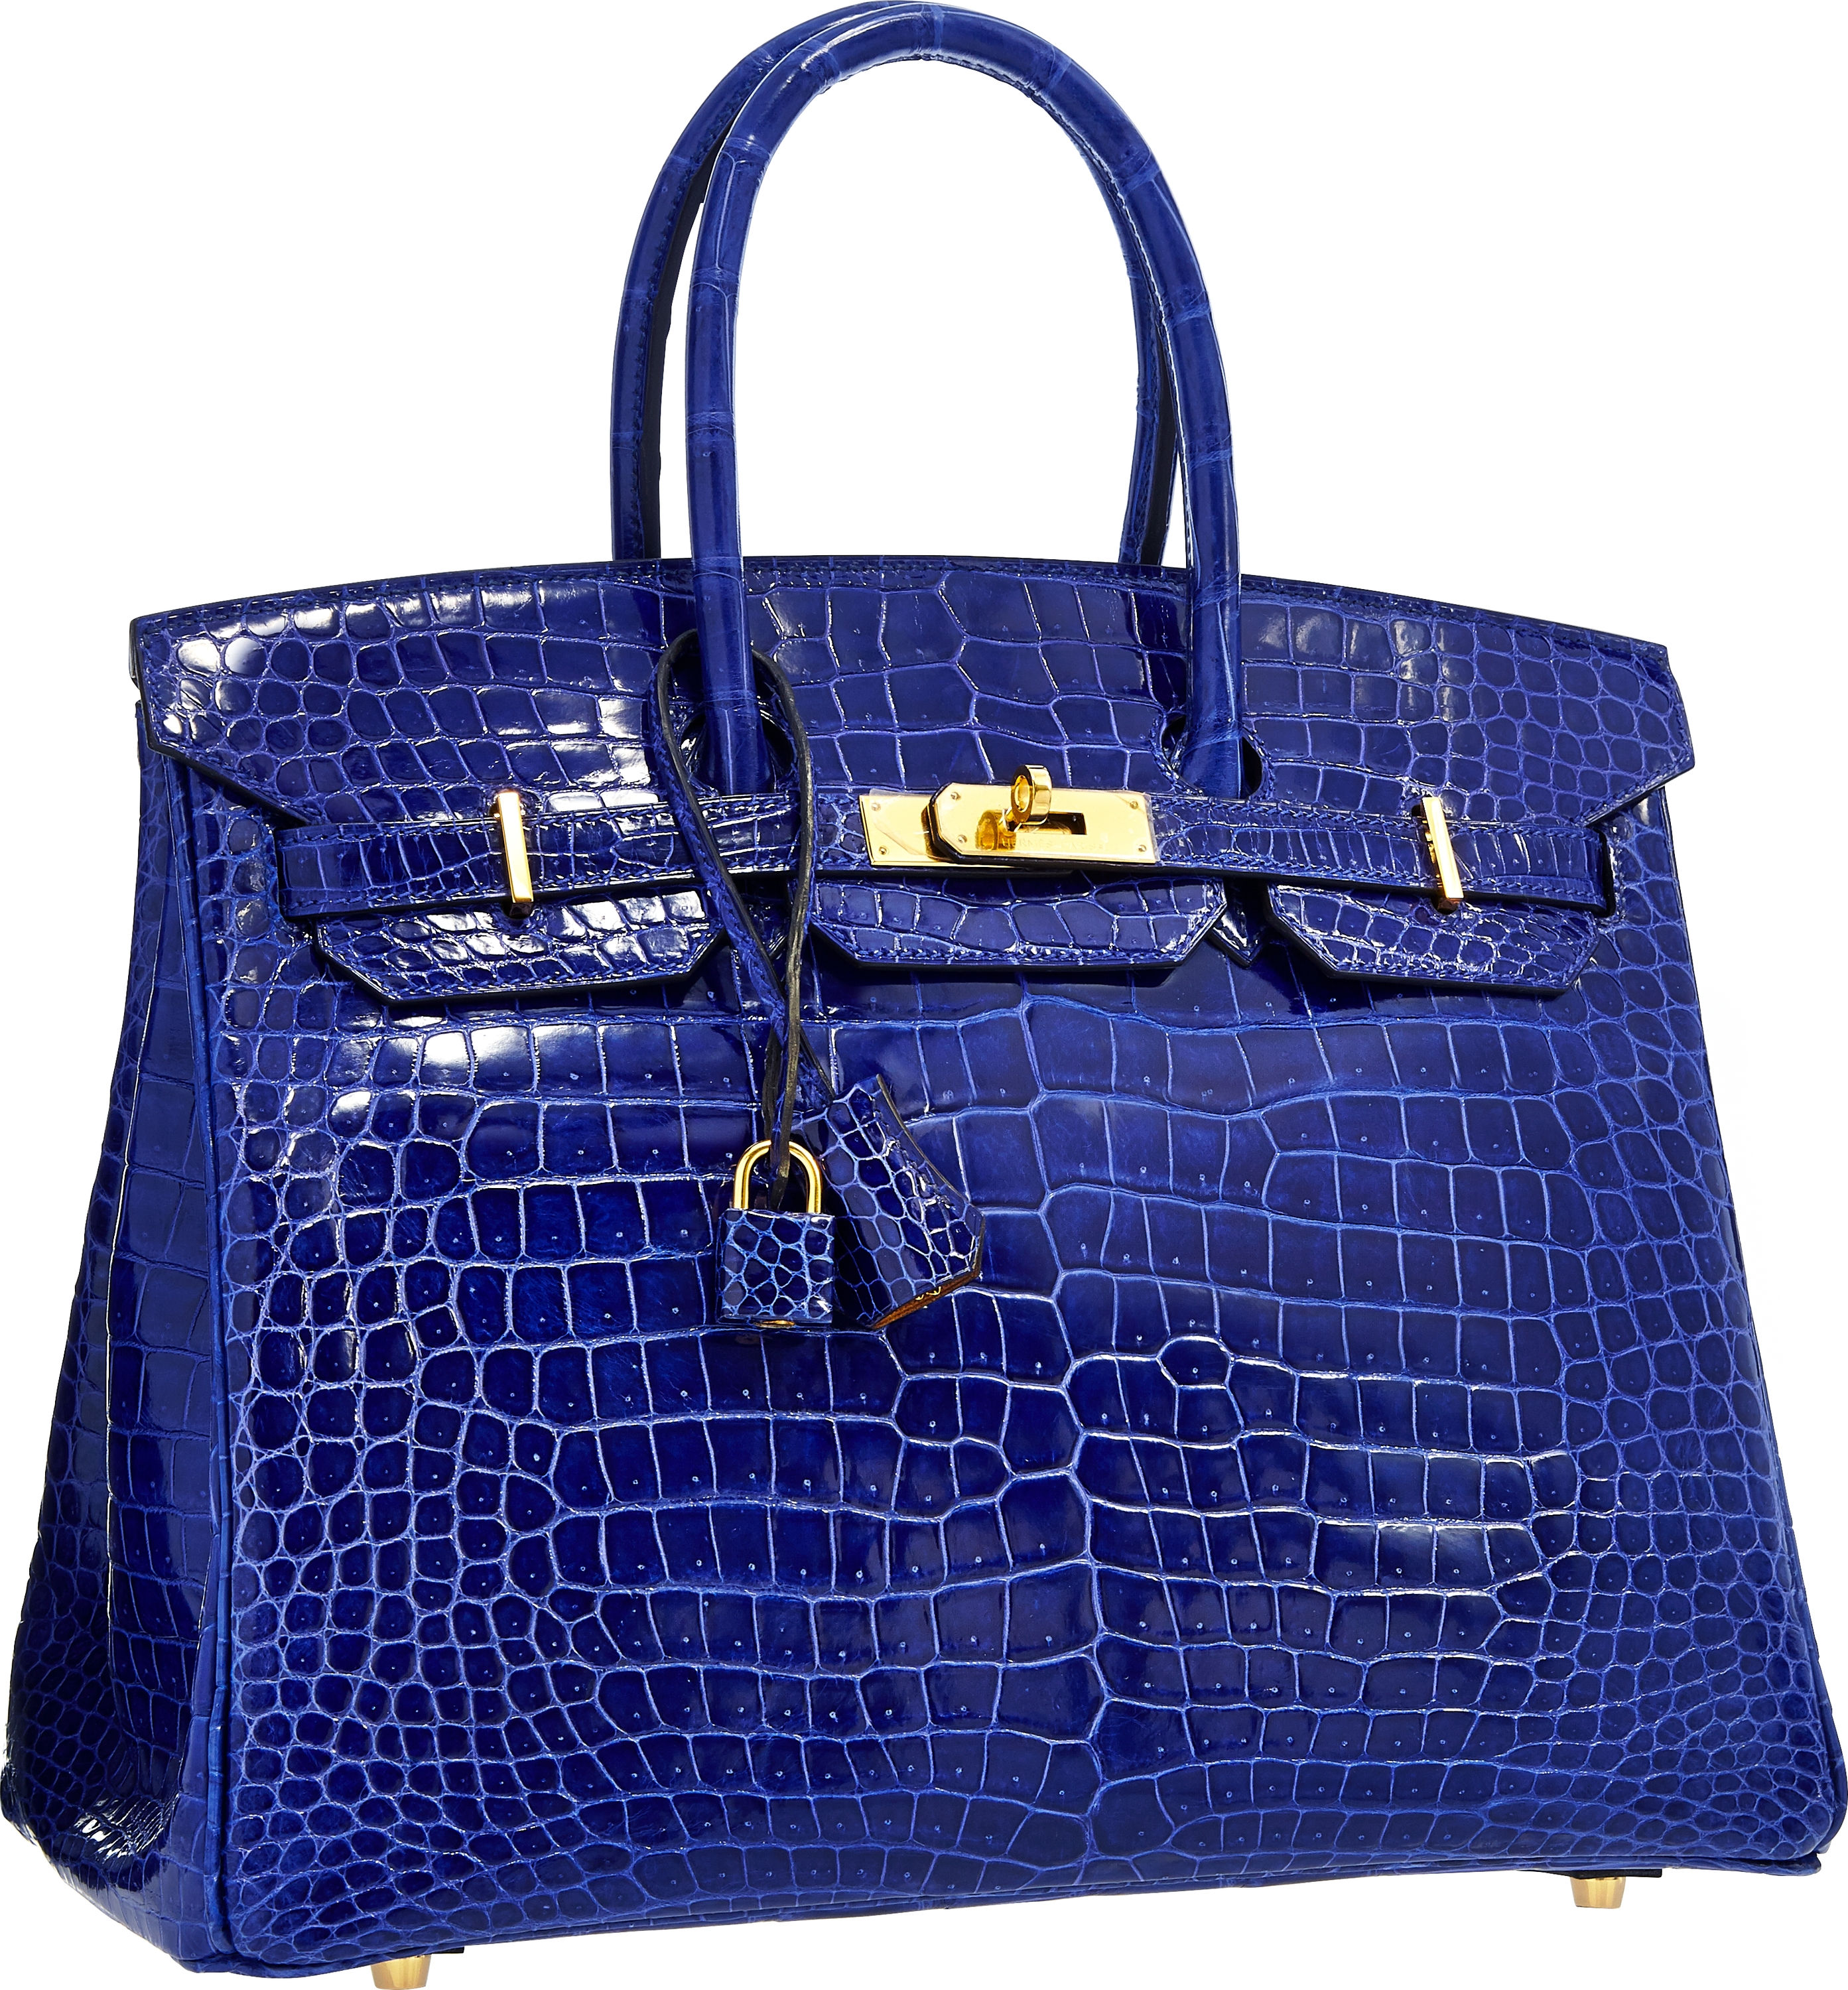 This Special Order Horseshoe 35cm Shiny Electric Blue Birkin in Porosus Crocodile, the most desirable material, brought $81,250 at a 2015 Heritage New York Valentine Signature Auction. Courtesy Heritage Auctions